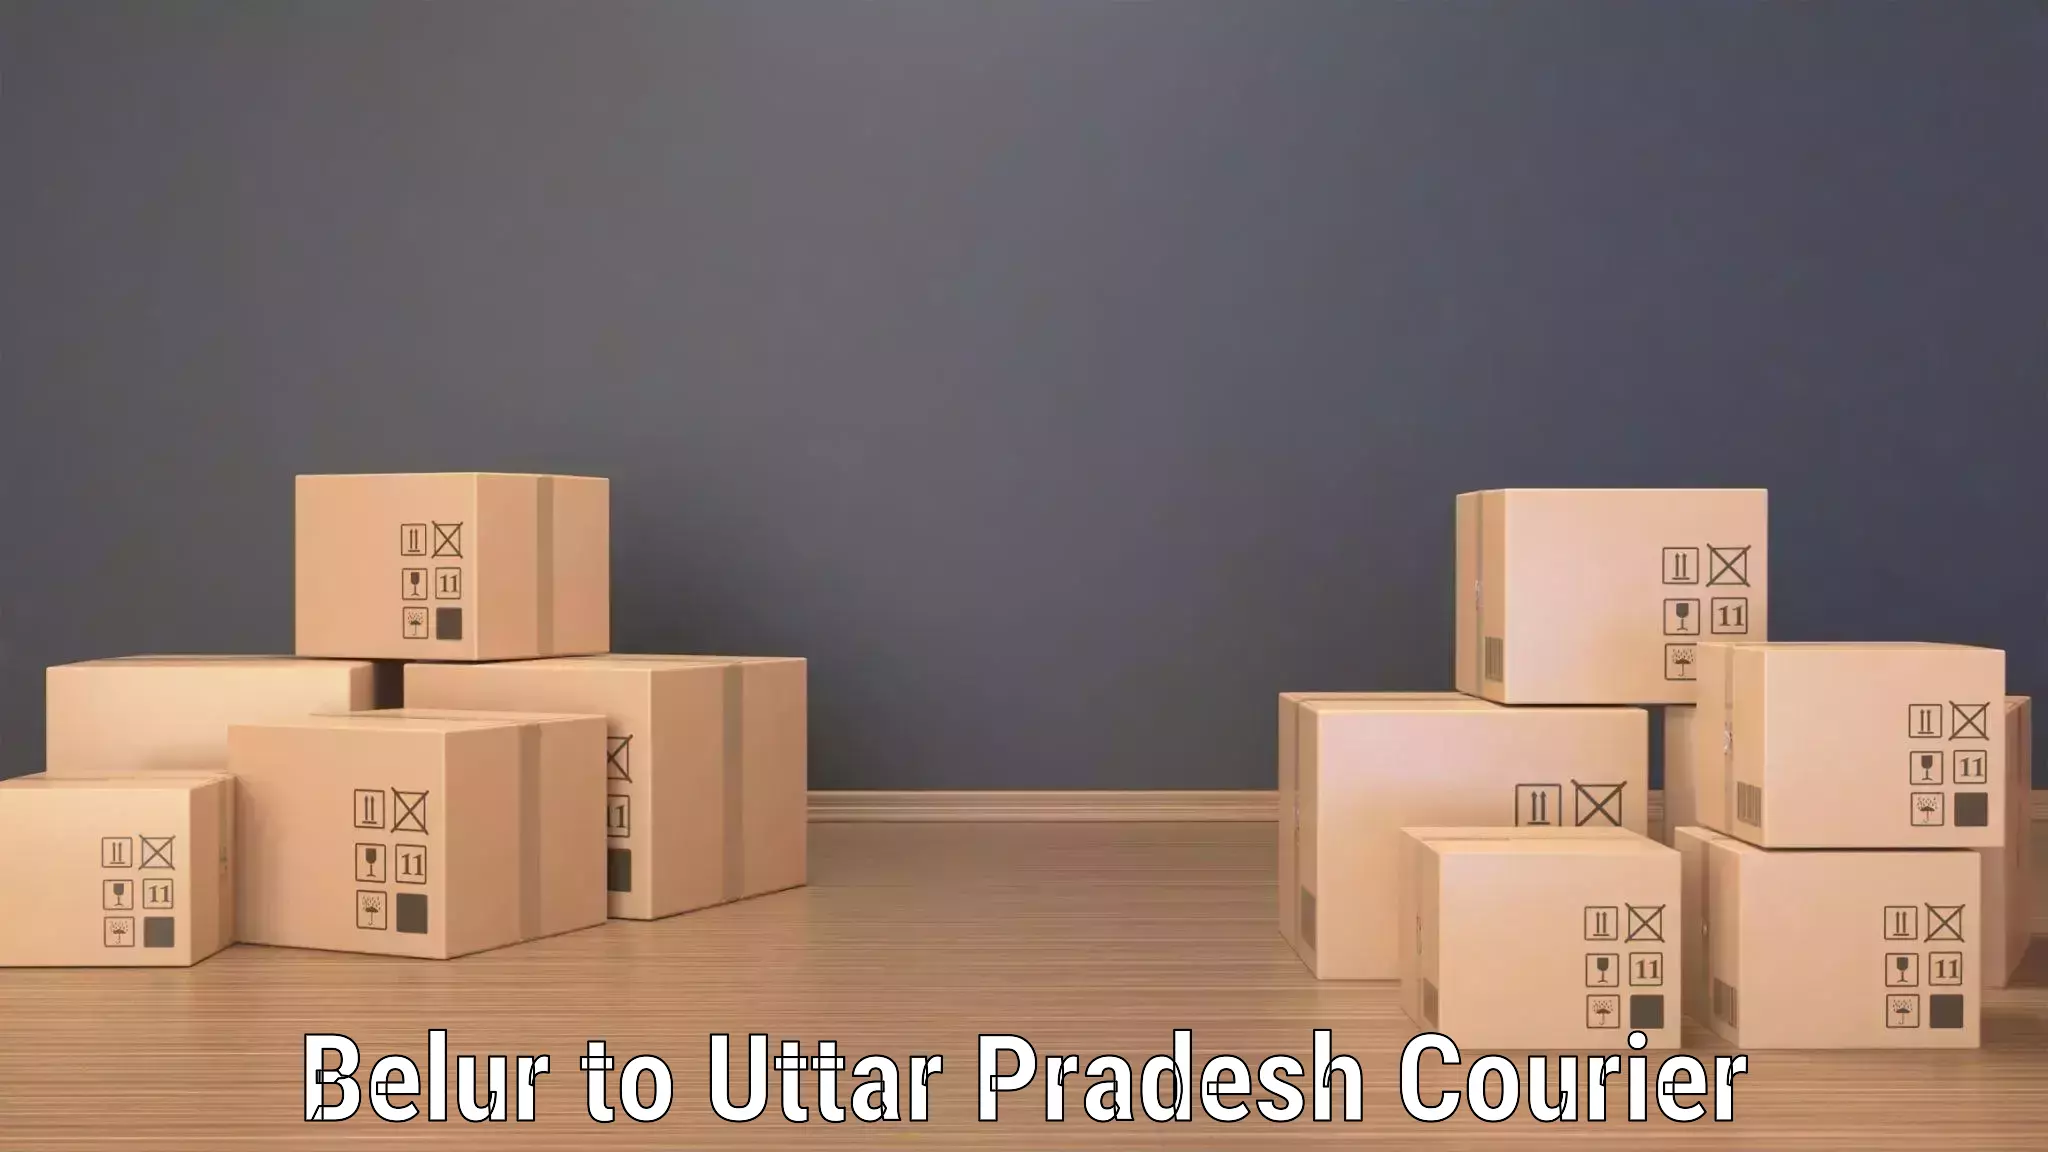 Residential courier service Belur to Sikandara